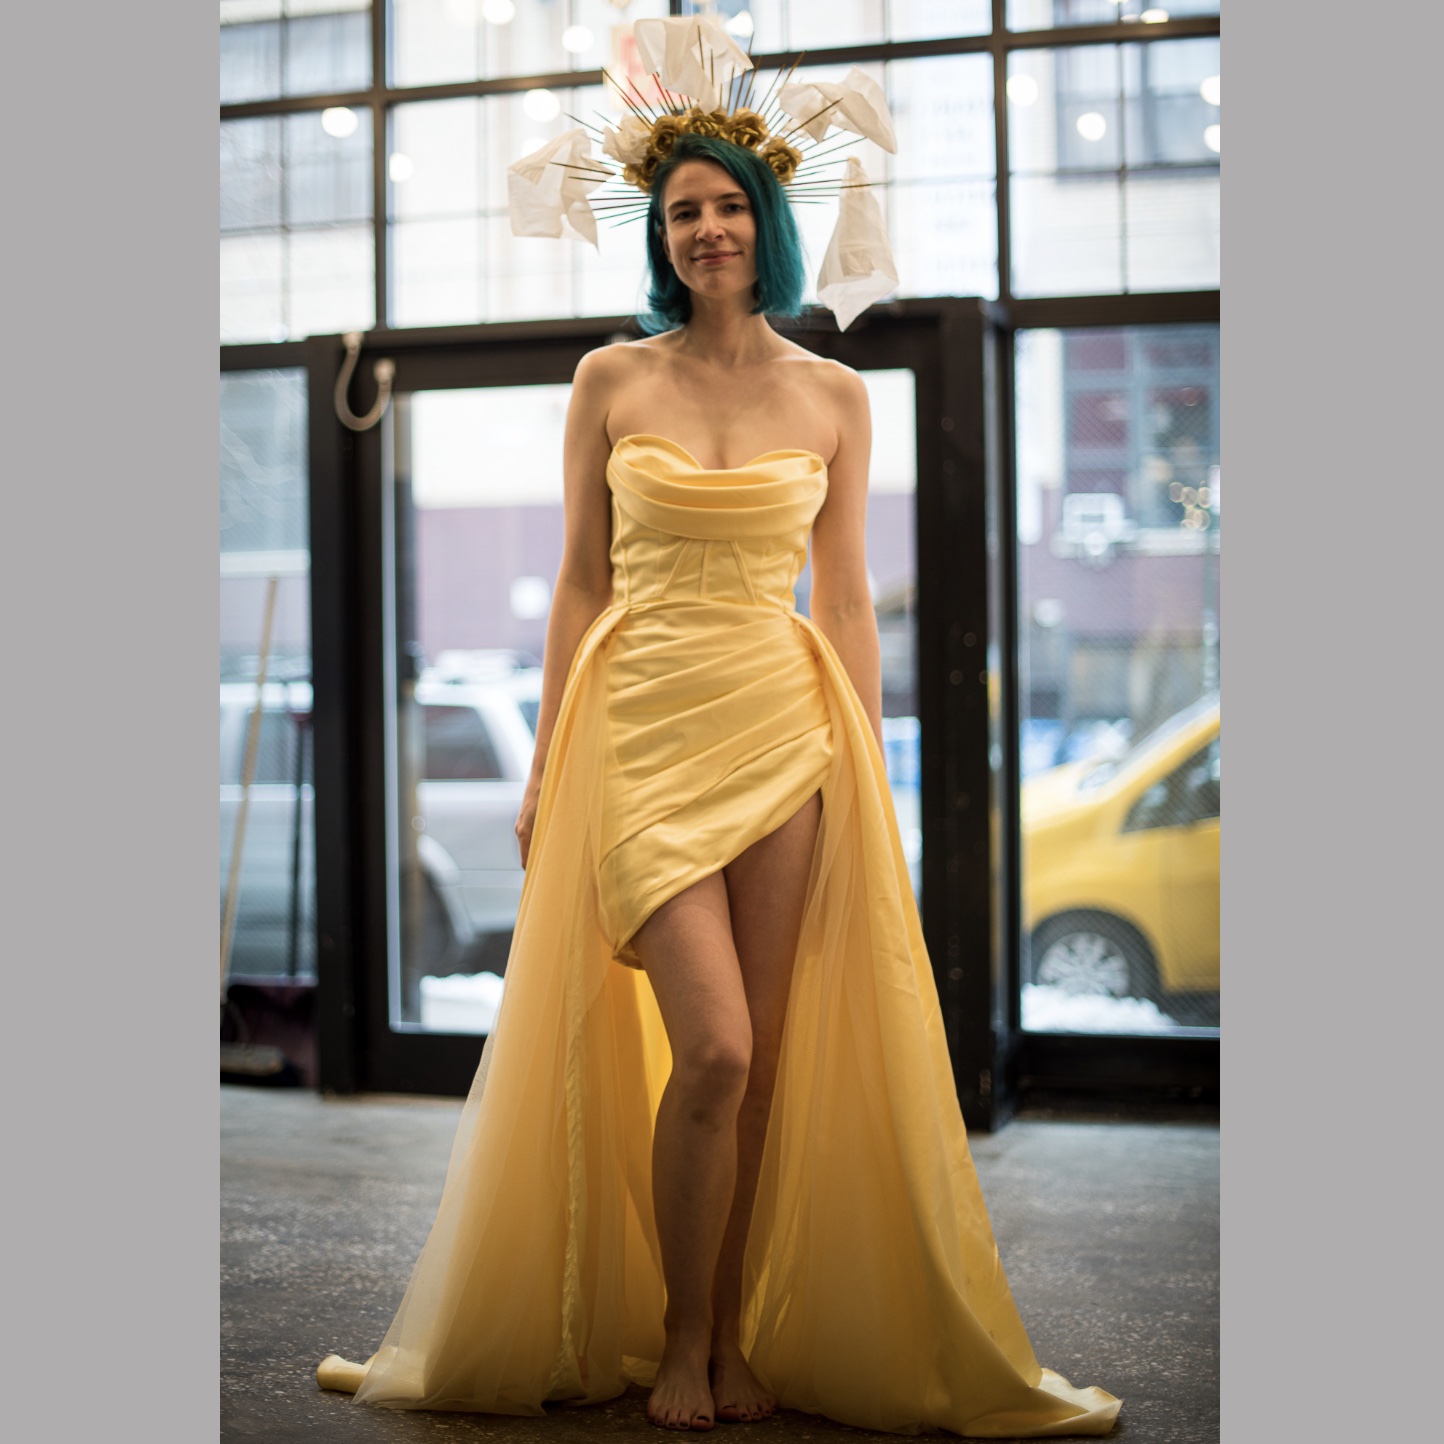 a woman in a yellow dress, wearing a kleenex crown